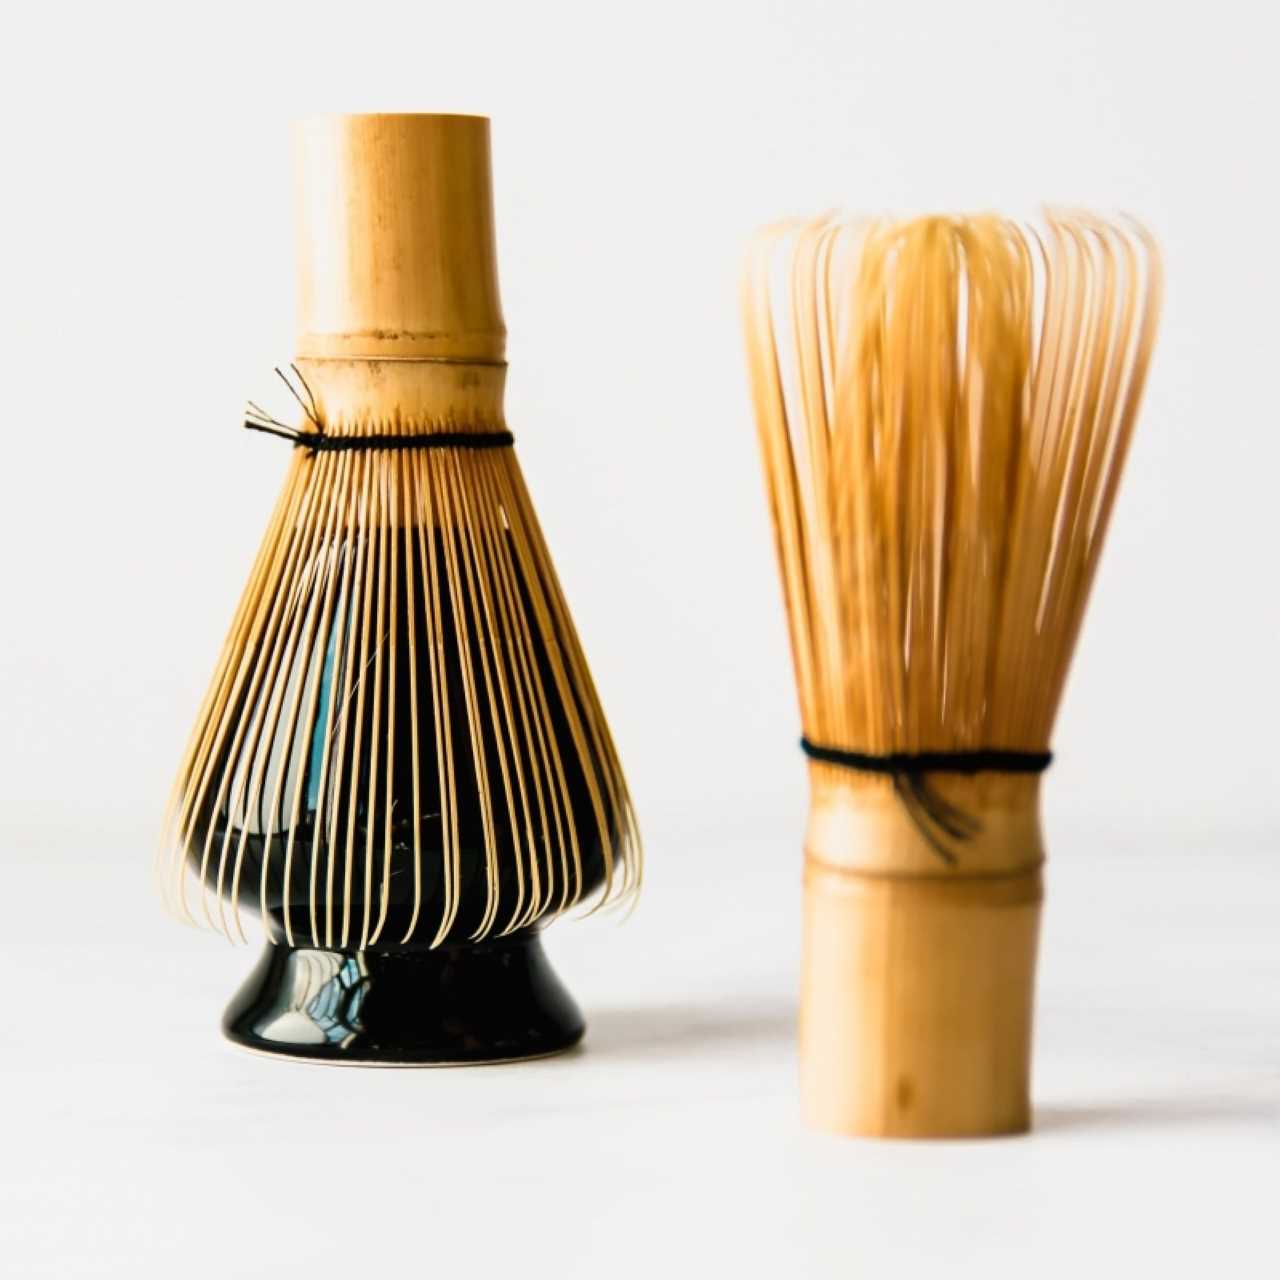 Matcha whisk on a whisk holder and a separate whisk on the side